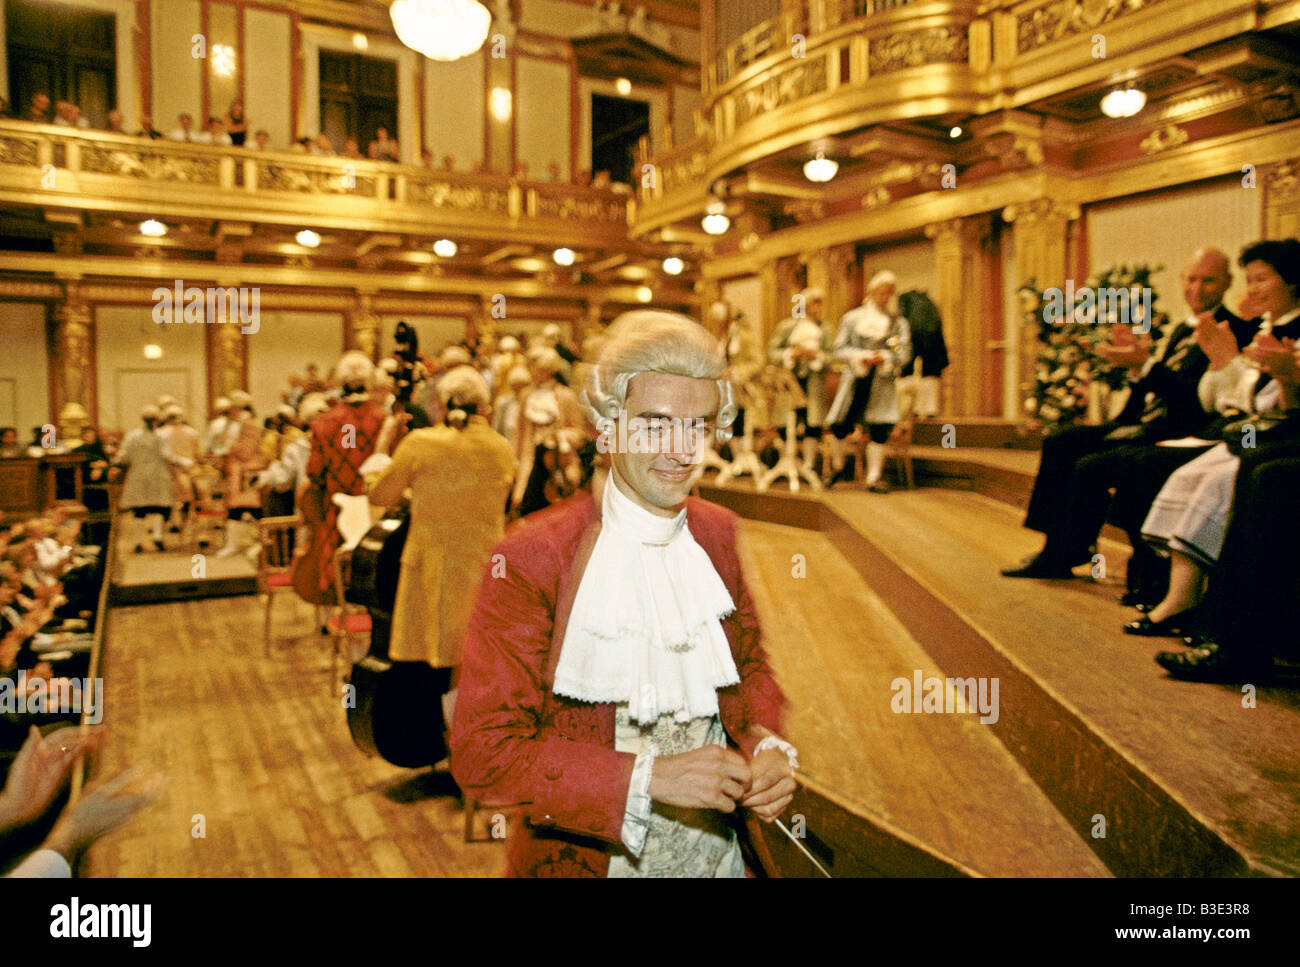 CONDUCTOR OF THE MOZART PLAYERS IN PERIOD COSTUME LEAVES THE STAGE TO APPLAUSE AFTER PERFORMING A MOZART CONCERT IN MUSIKVERIN Stock Photo